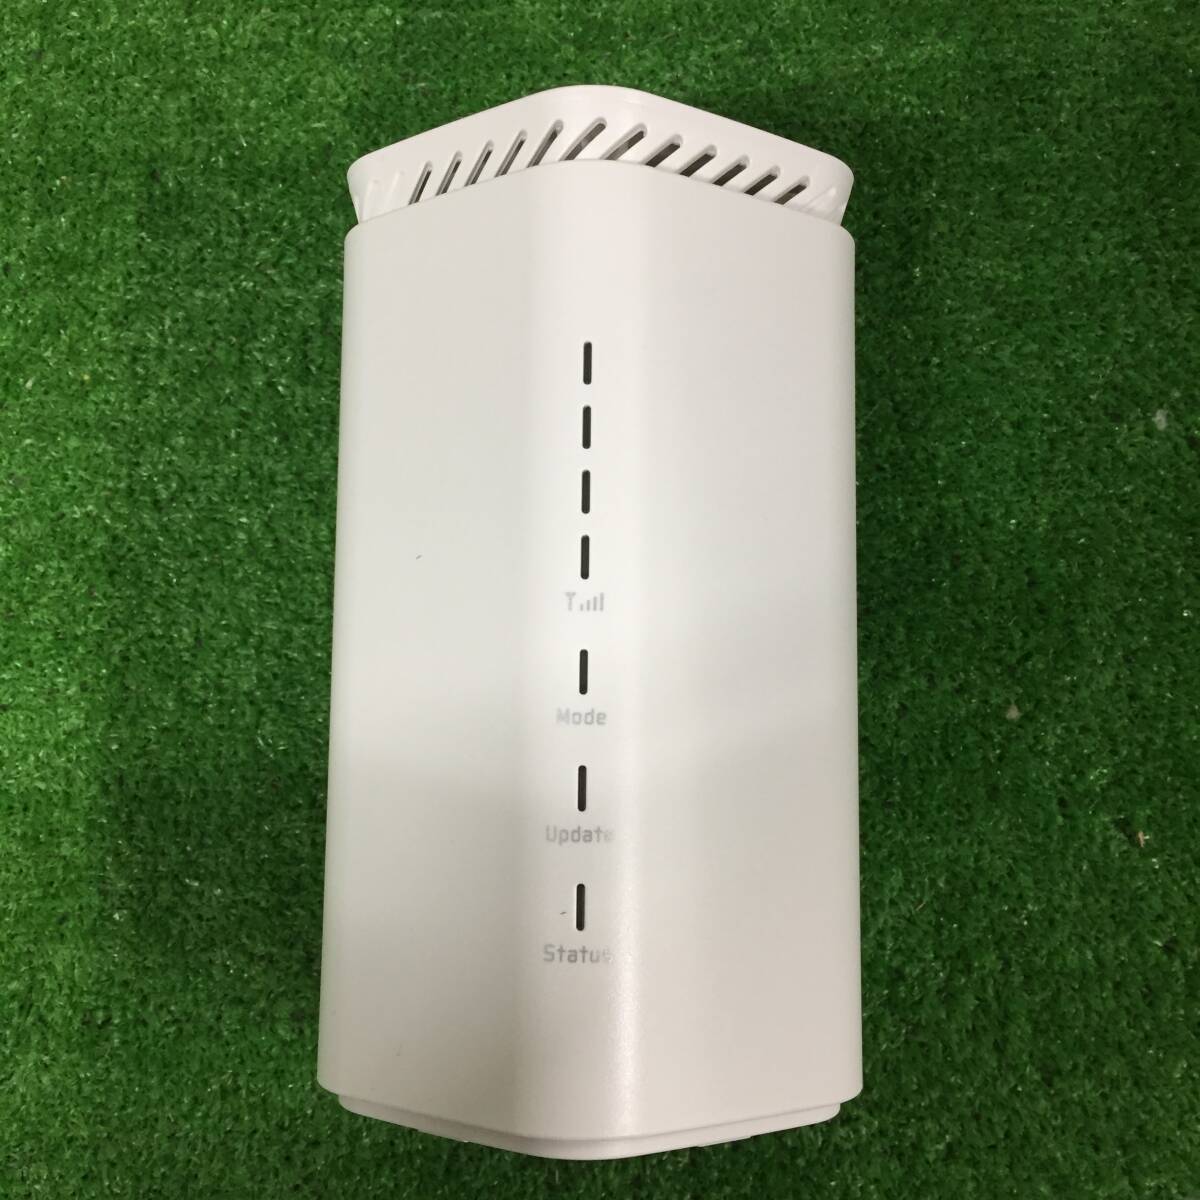 * NEC Speed Wi-Fi HOME 5G L12 NAR02 Home router 2022 year made 28-11